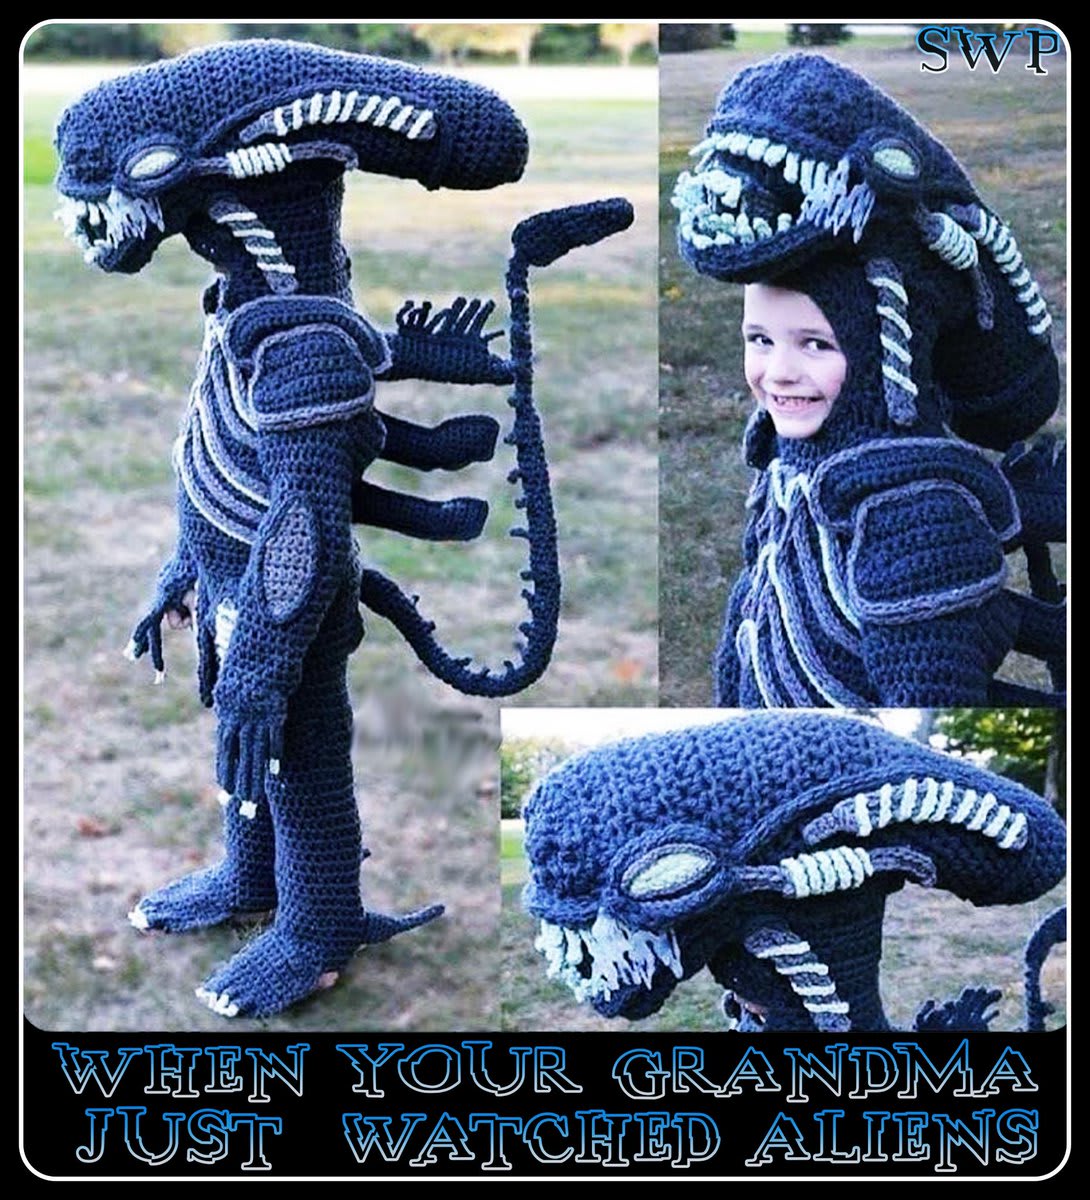 Anybody wanna knit me one of these for Halloween?